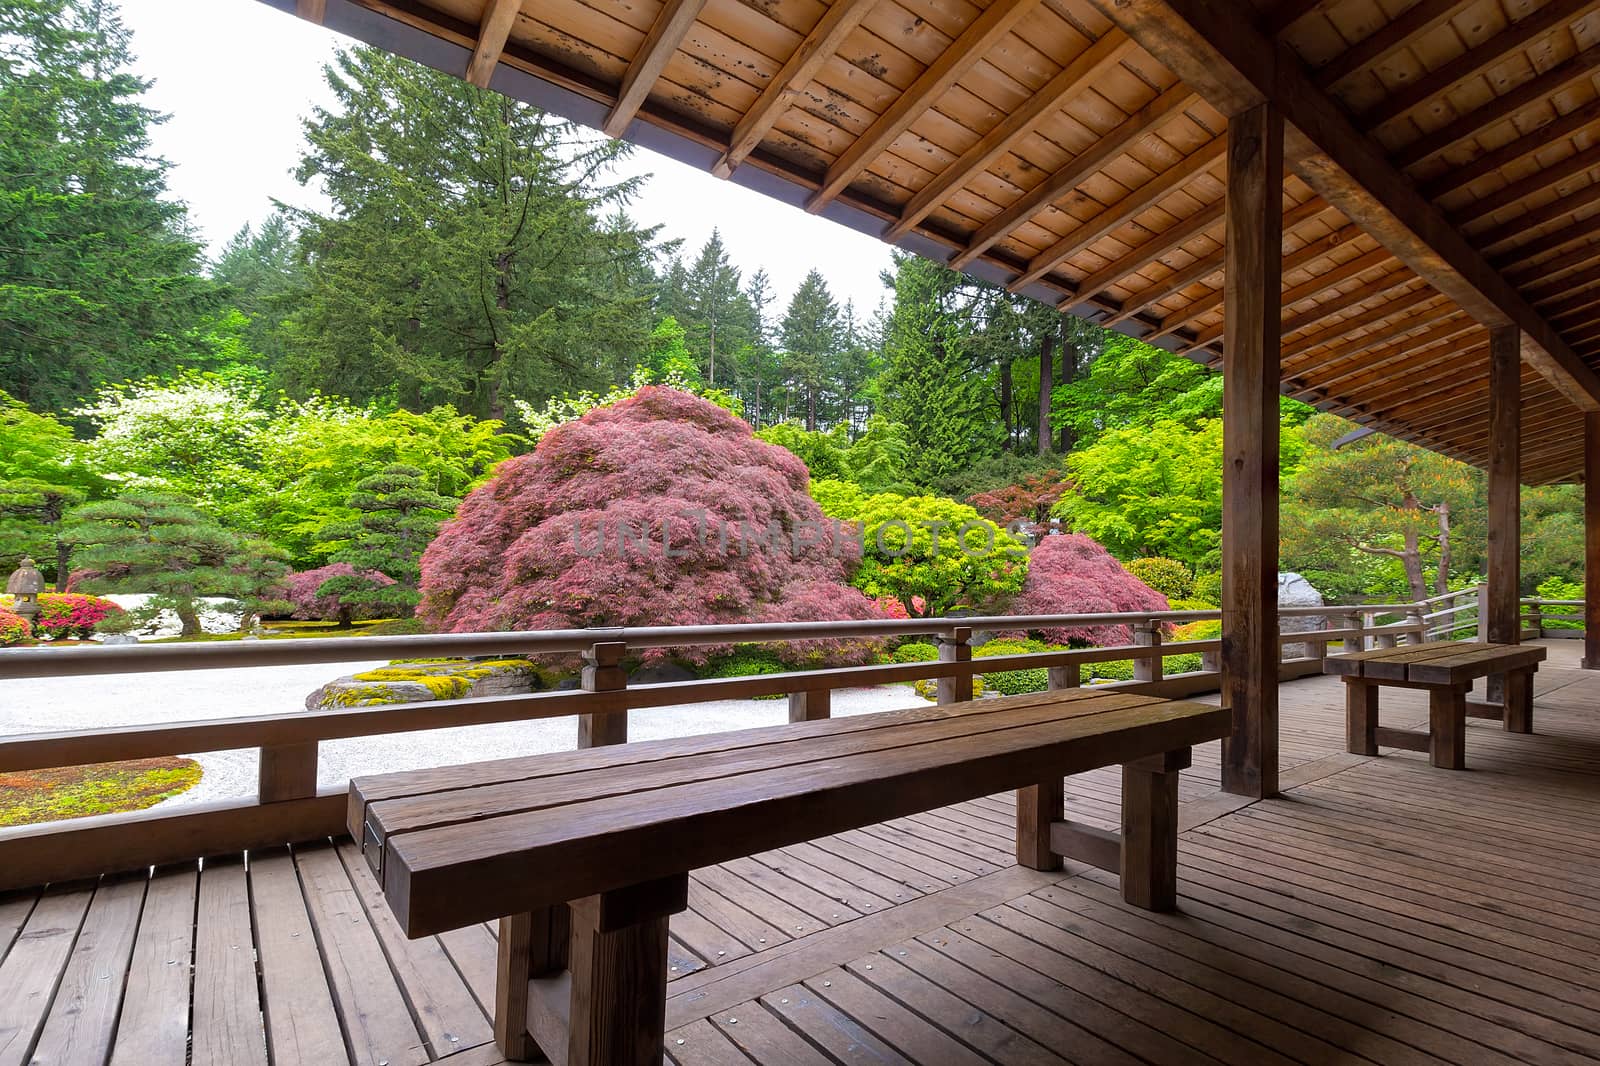 View of Japanese Garden from the Veranda of the Pavilion